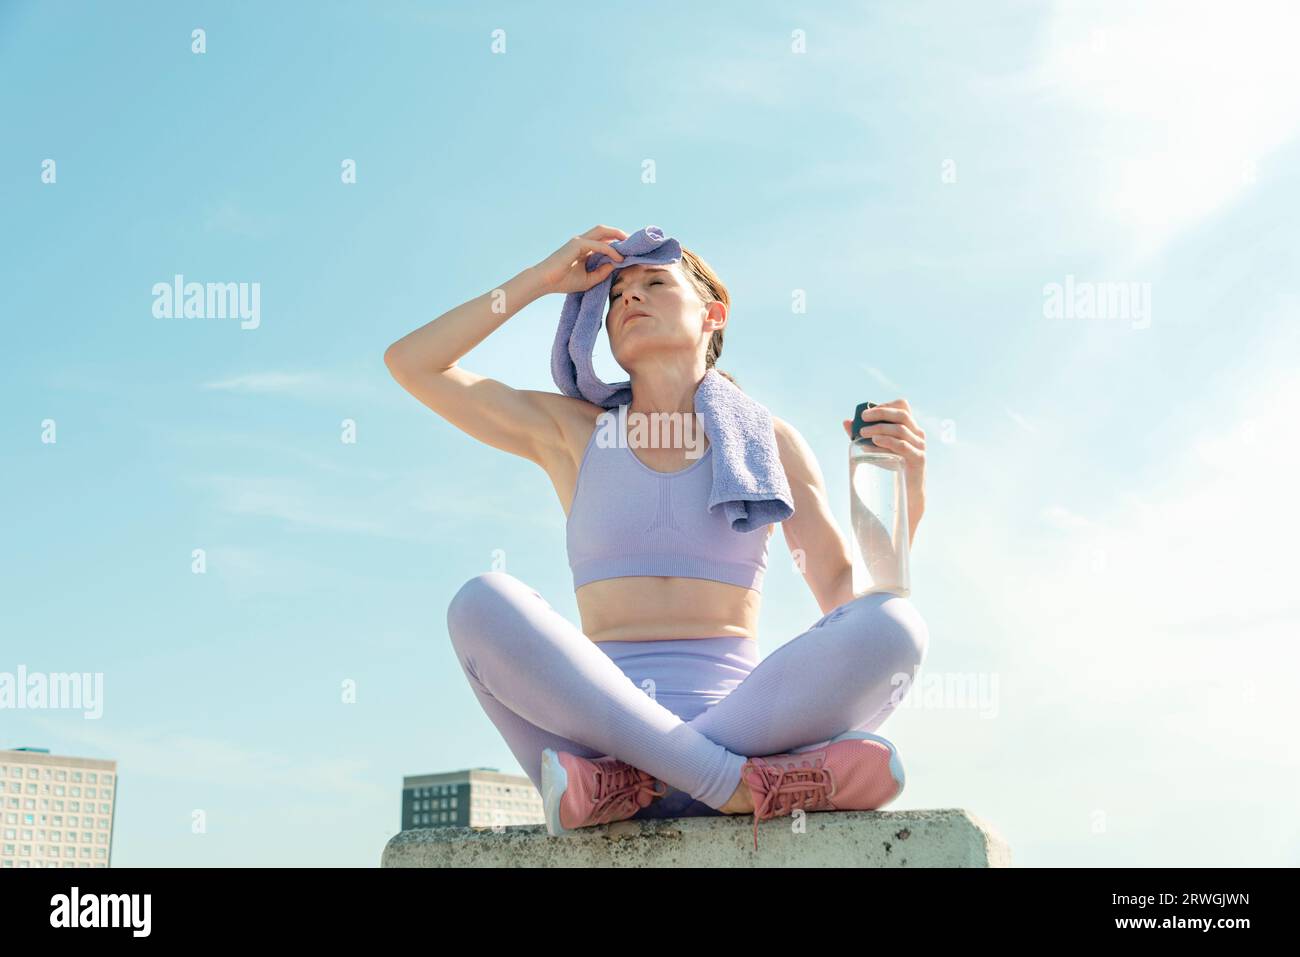 sporty runner sitting wiping head with a towel holding a glass water bottle, urban setting Stock Photo